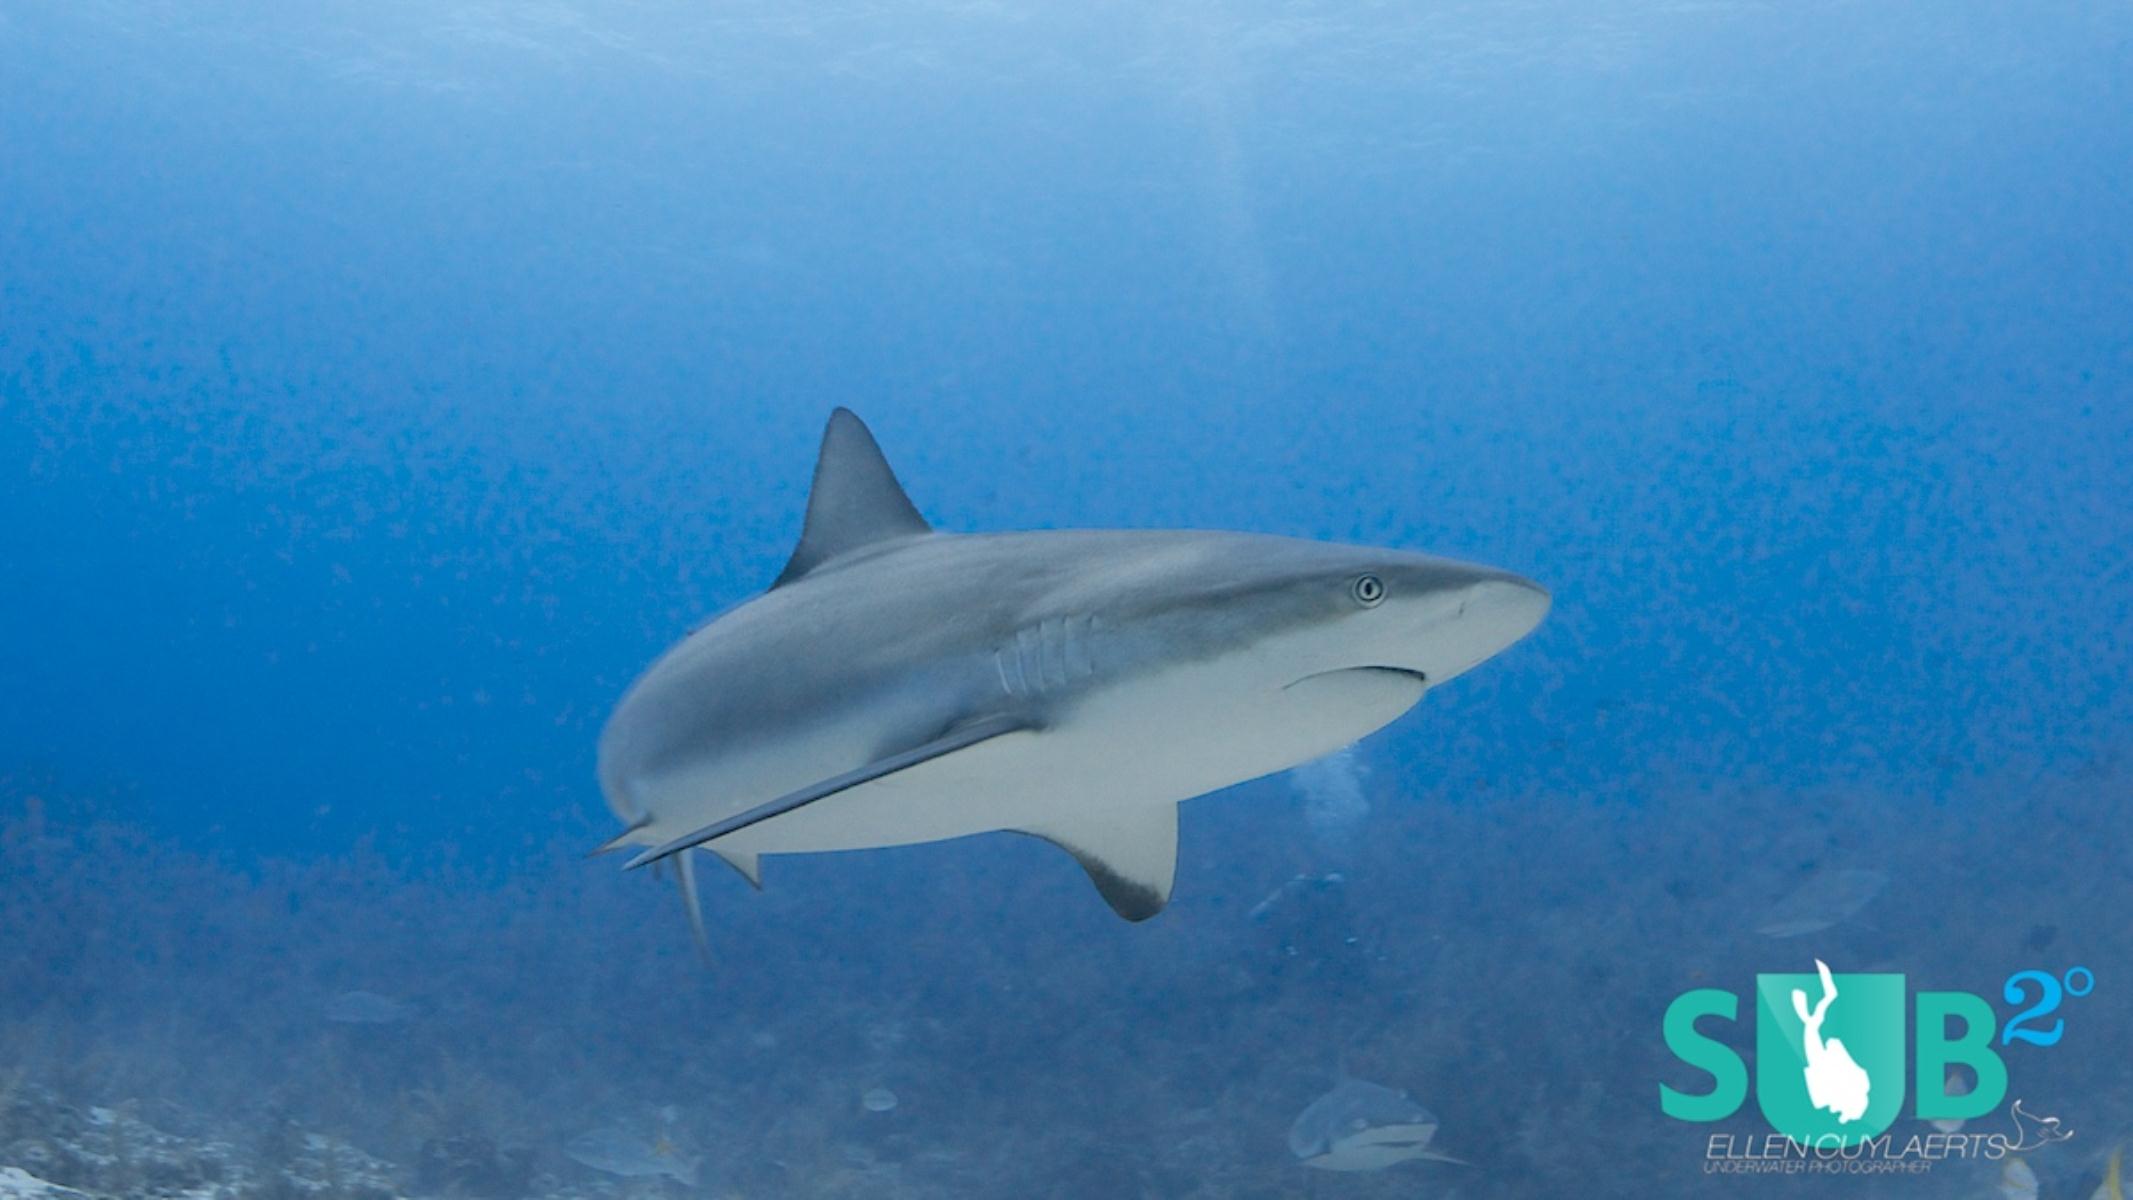 If you are lucky reef sharks wander on the sandy patches close to the wall!